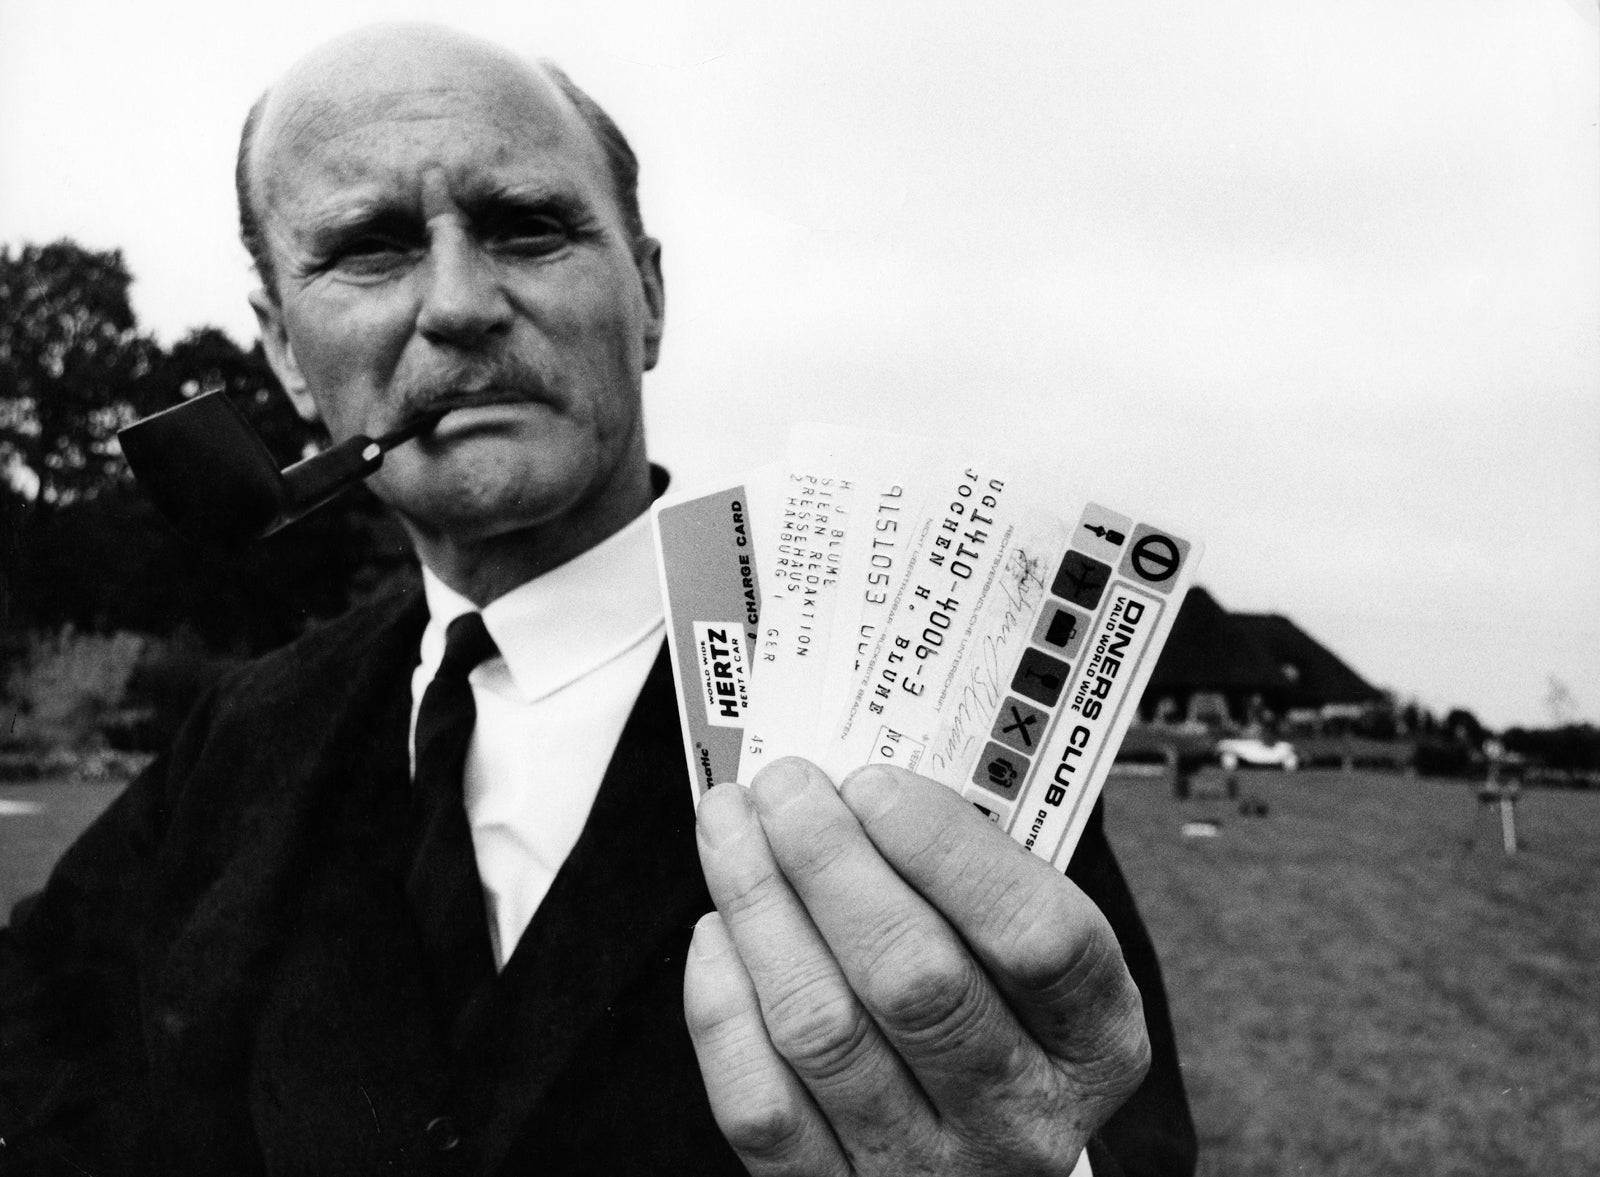 Black and white photos of man holding Diners Club credit cards in 1960